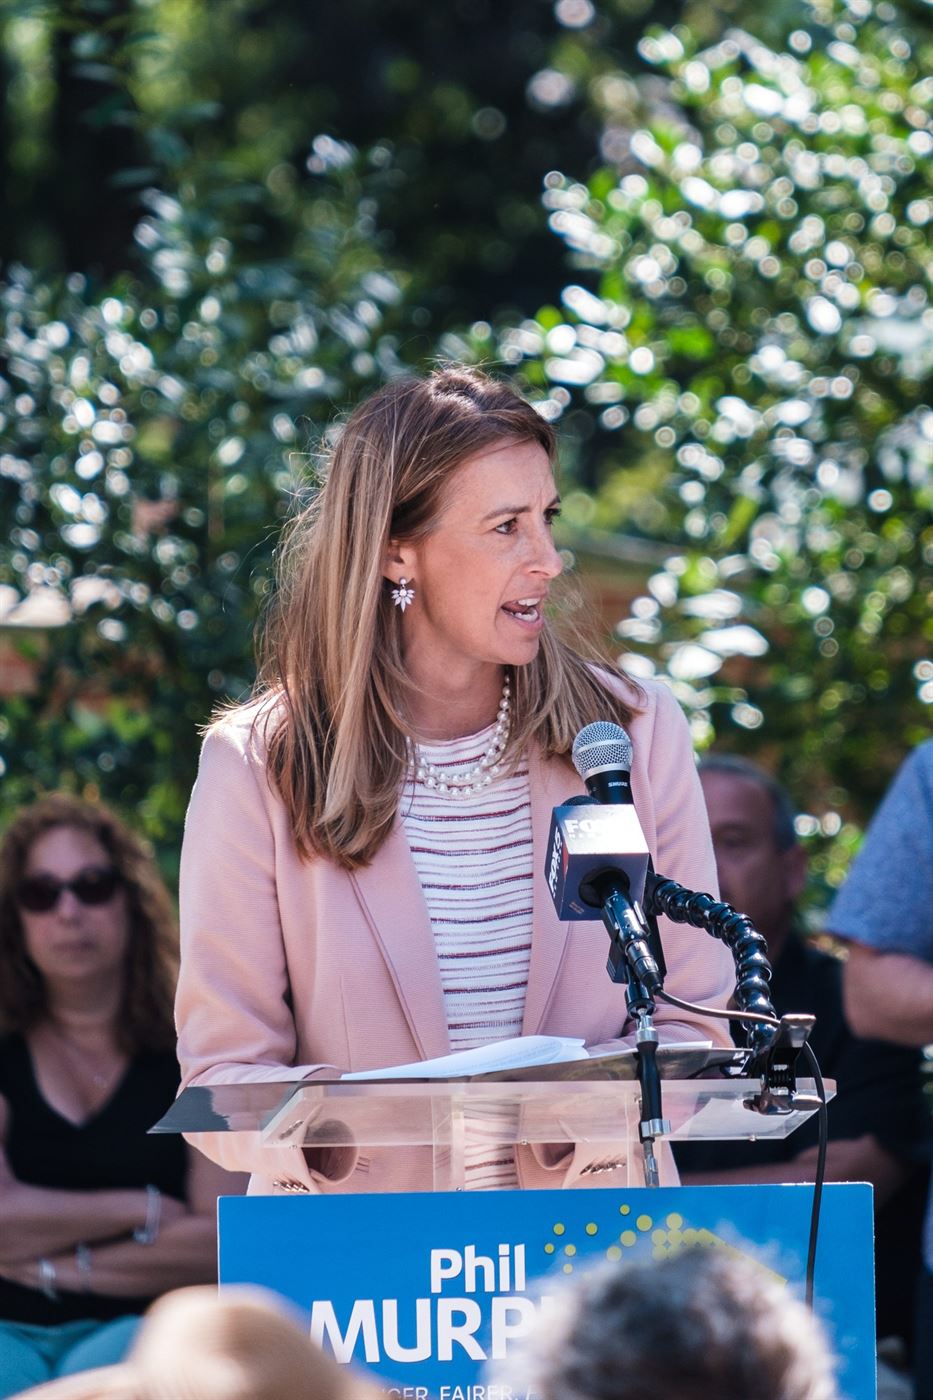 Rep. Mikie Sherrill speaking at the rally against gun violence. Michael Callejas | The Montclarion